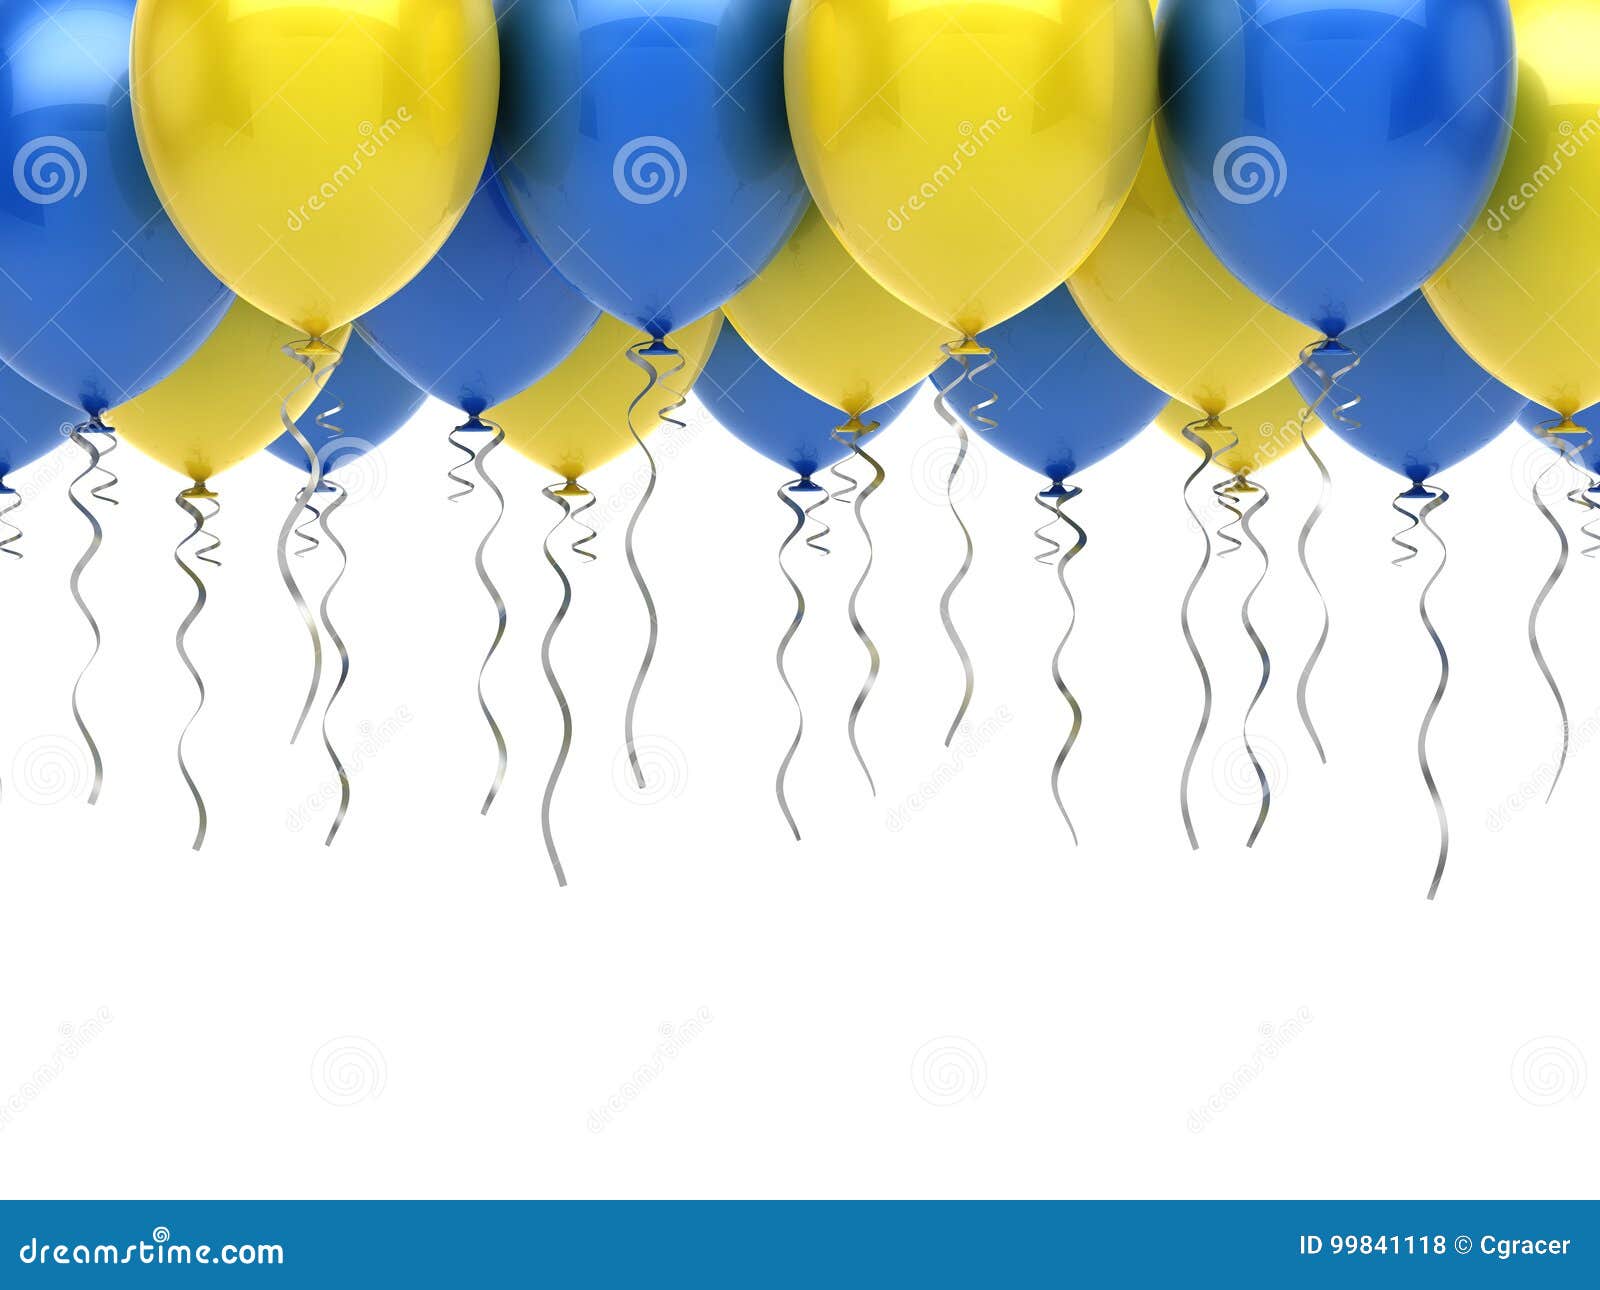 546 Happy Birthday Background Blue Yellow Pictures - MyWeb